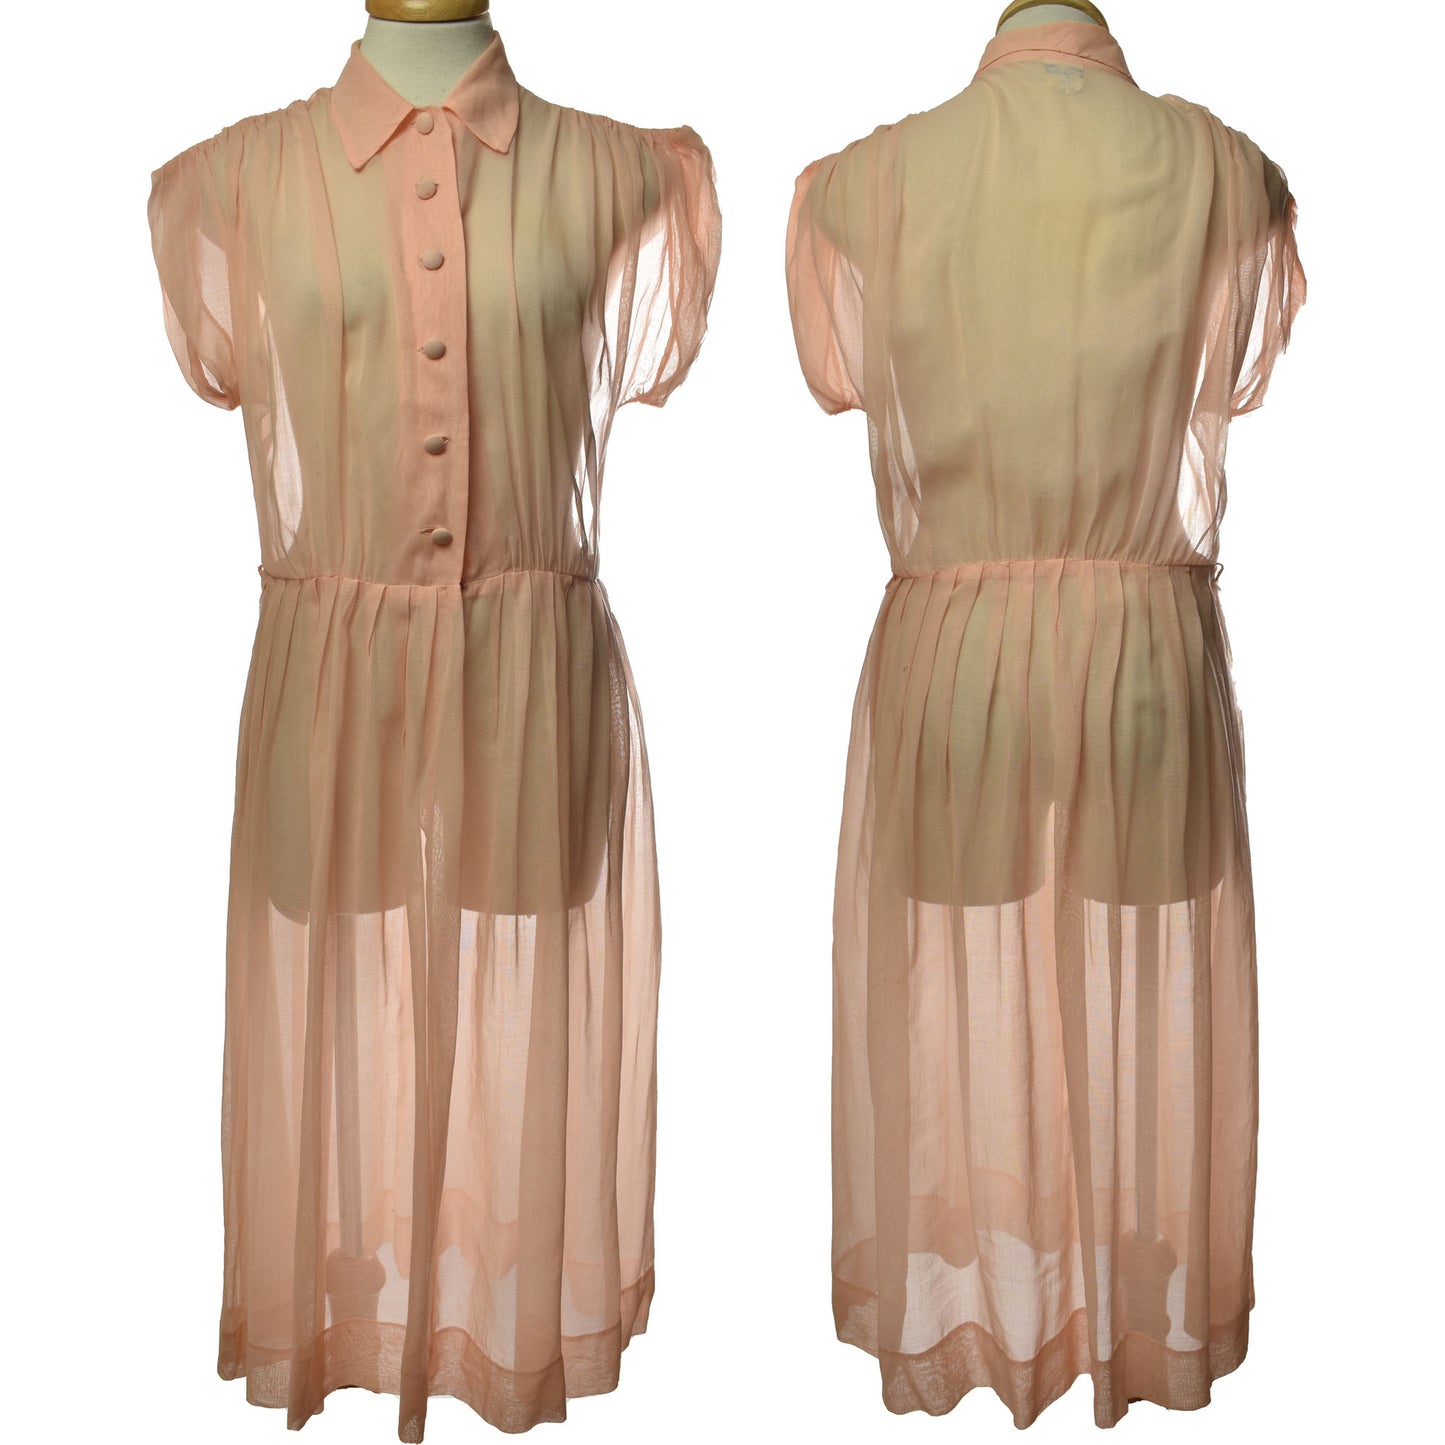 Vintage 50s Nelly Don Sheer Button Up Pleated Shirtwaist Dress